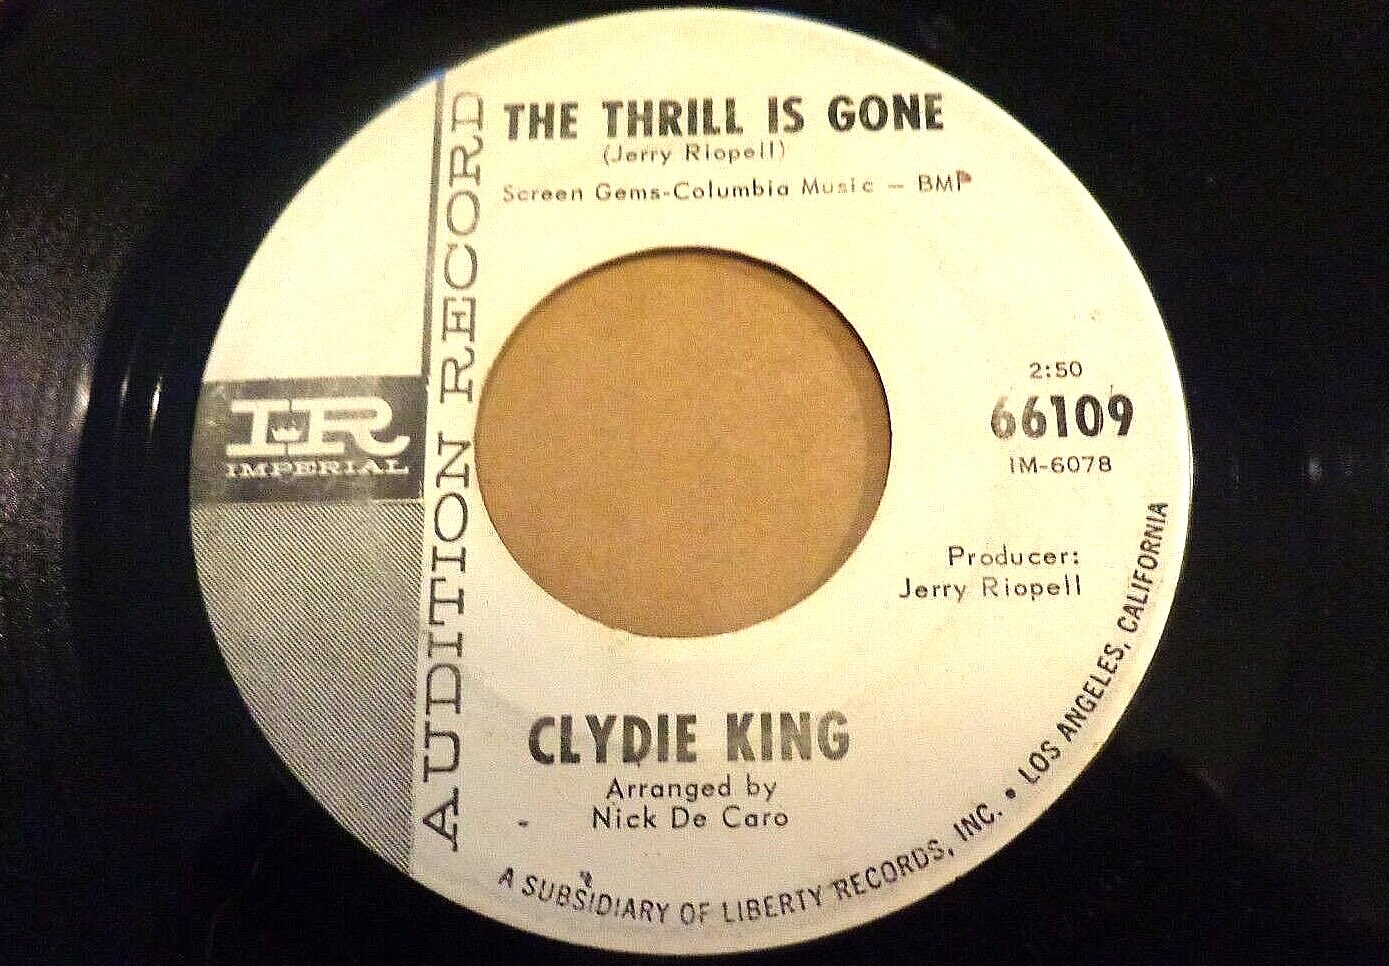 Clydie King - The Thrill Is Gone - 41 Rooms - show 127